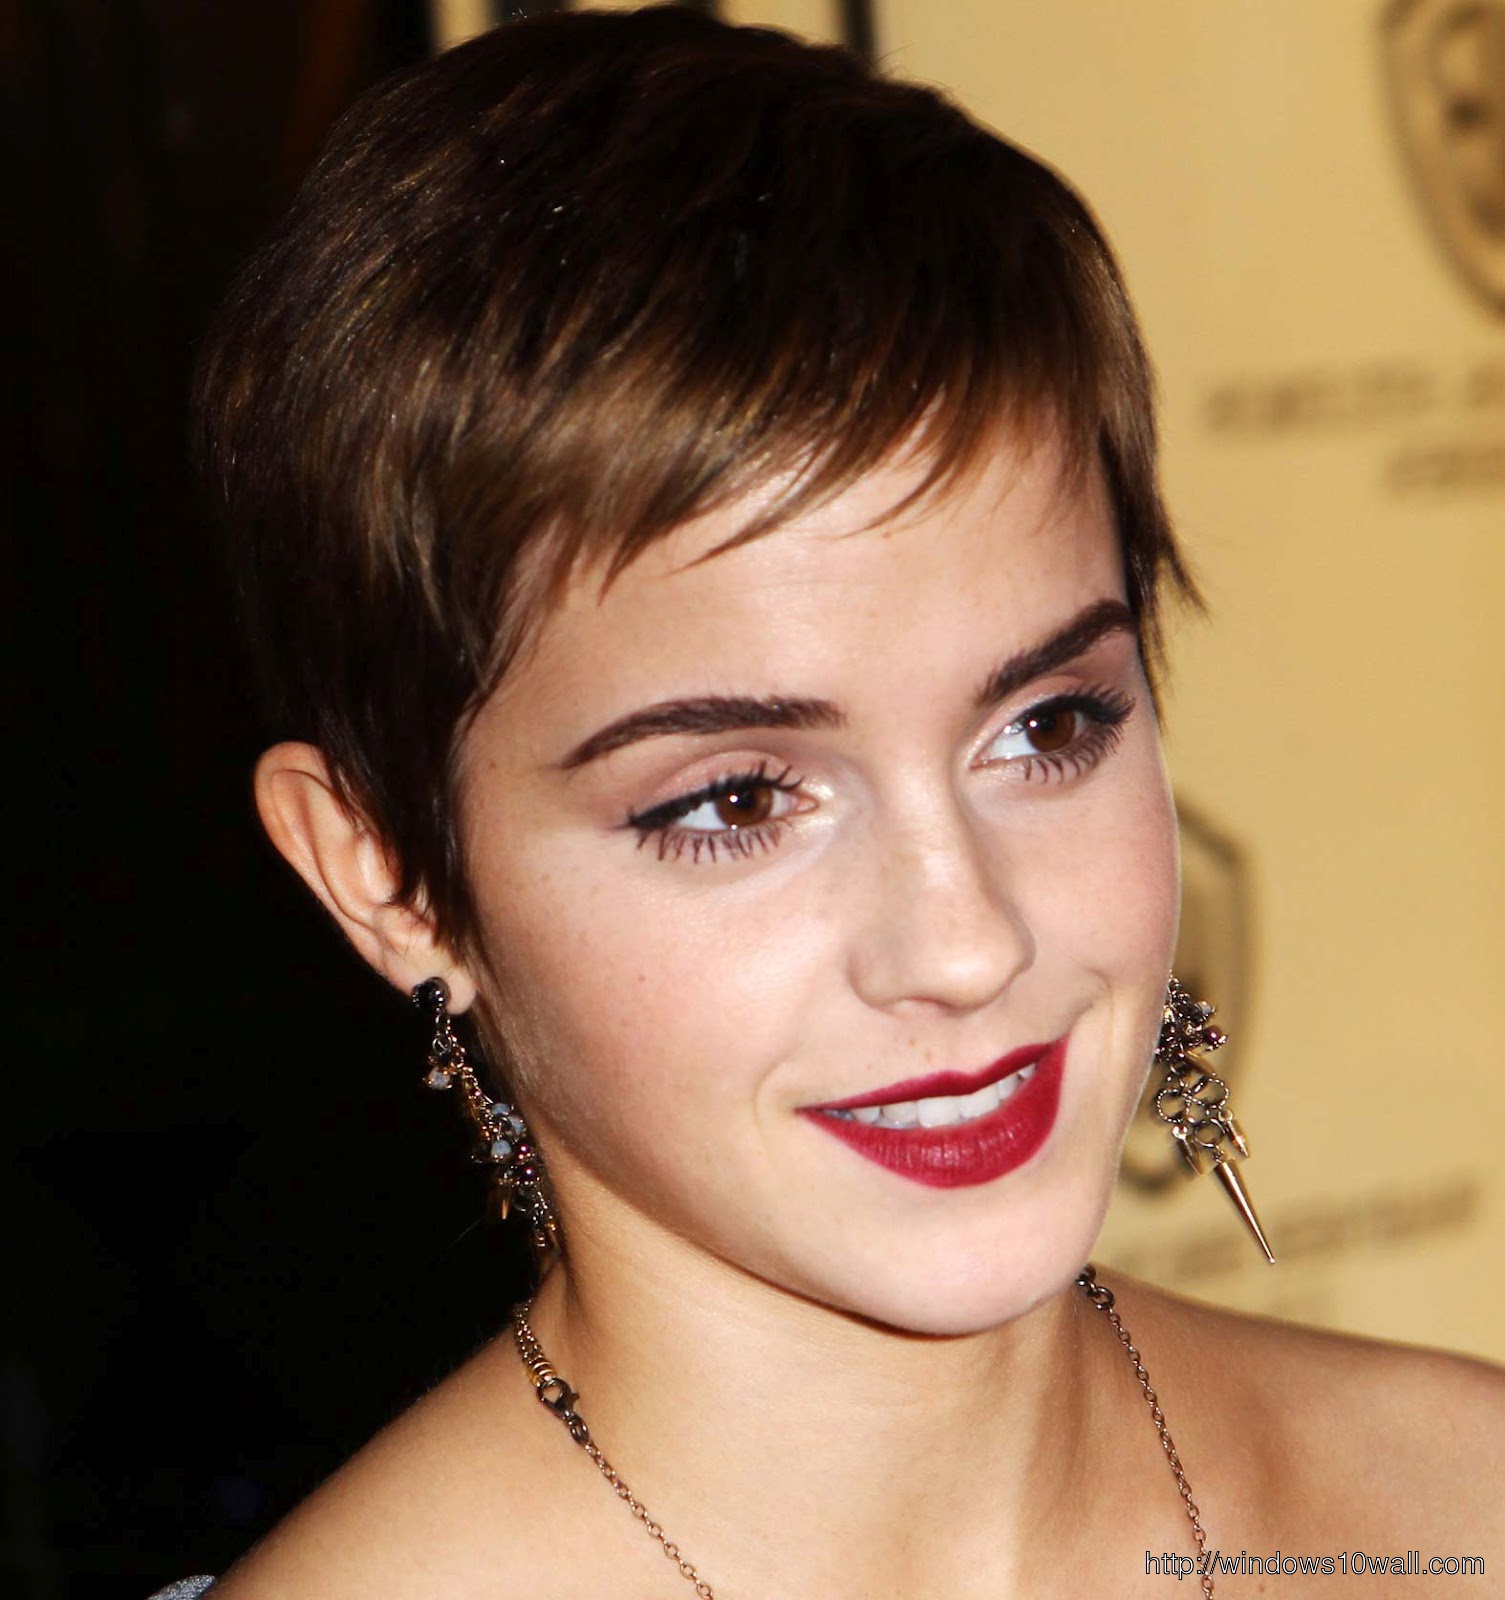 new-pixie-cut-hairstyle-background-wallpaper